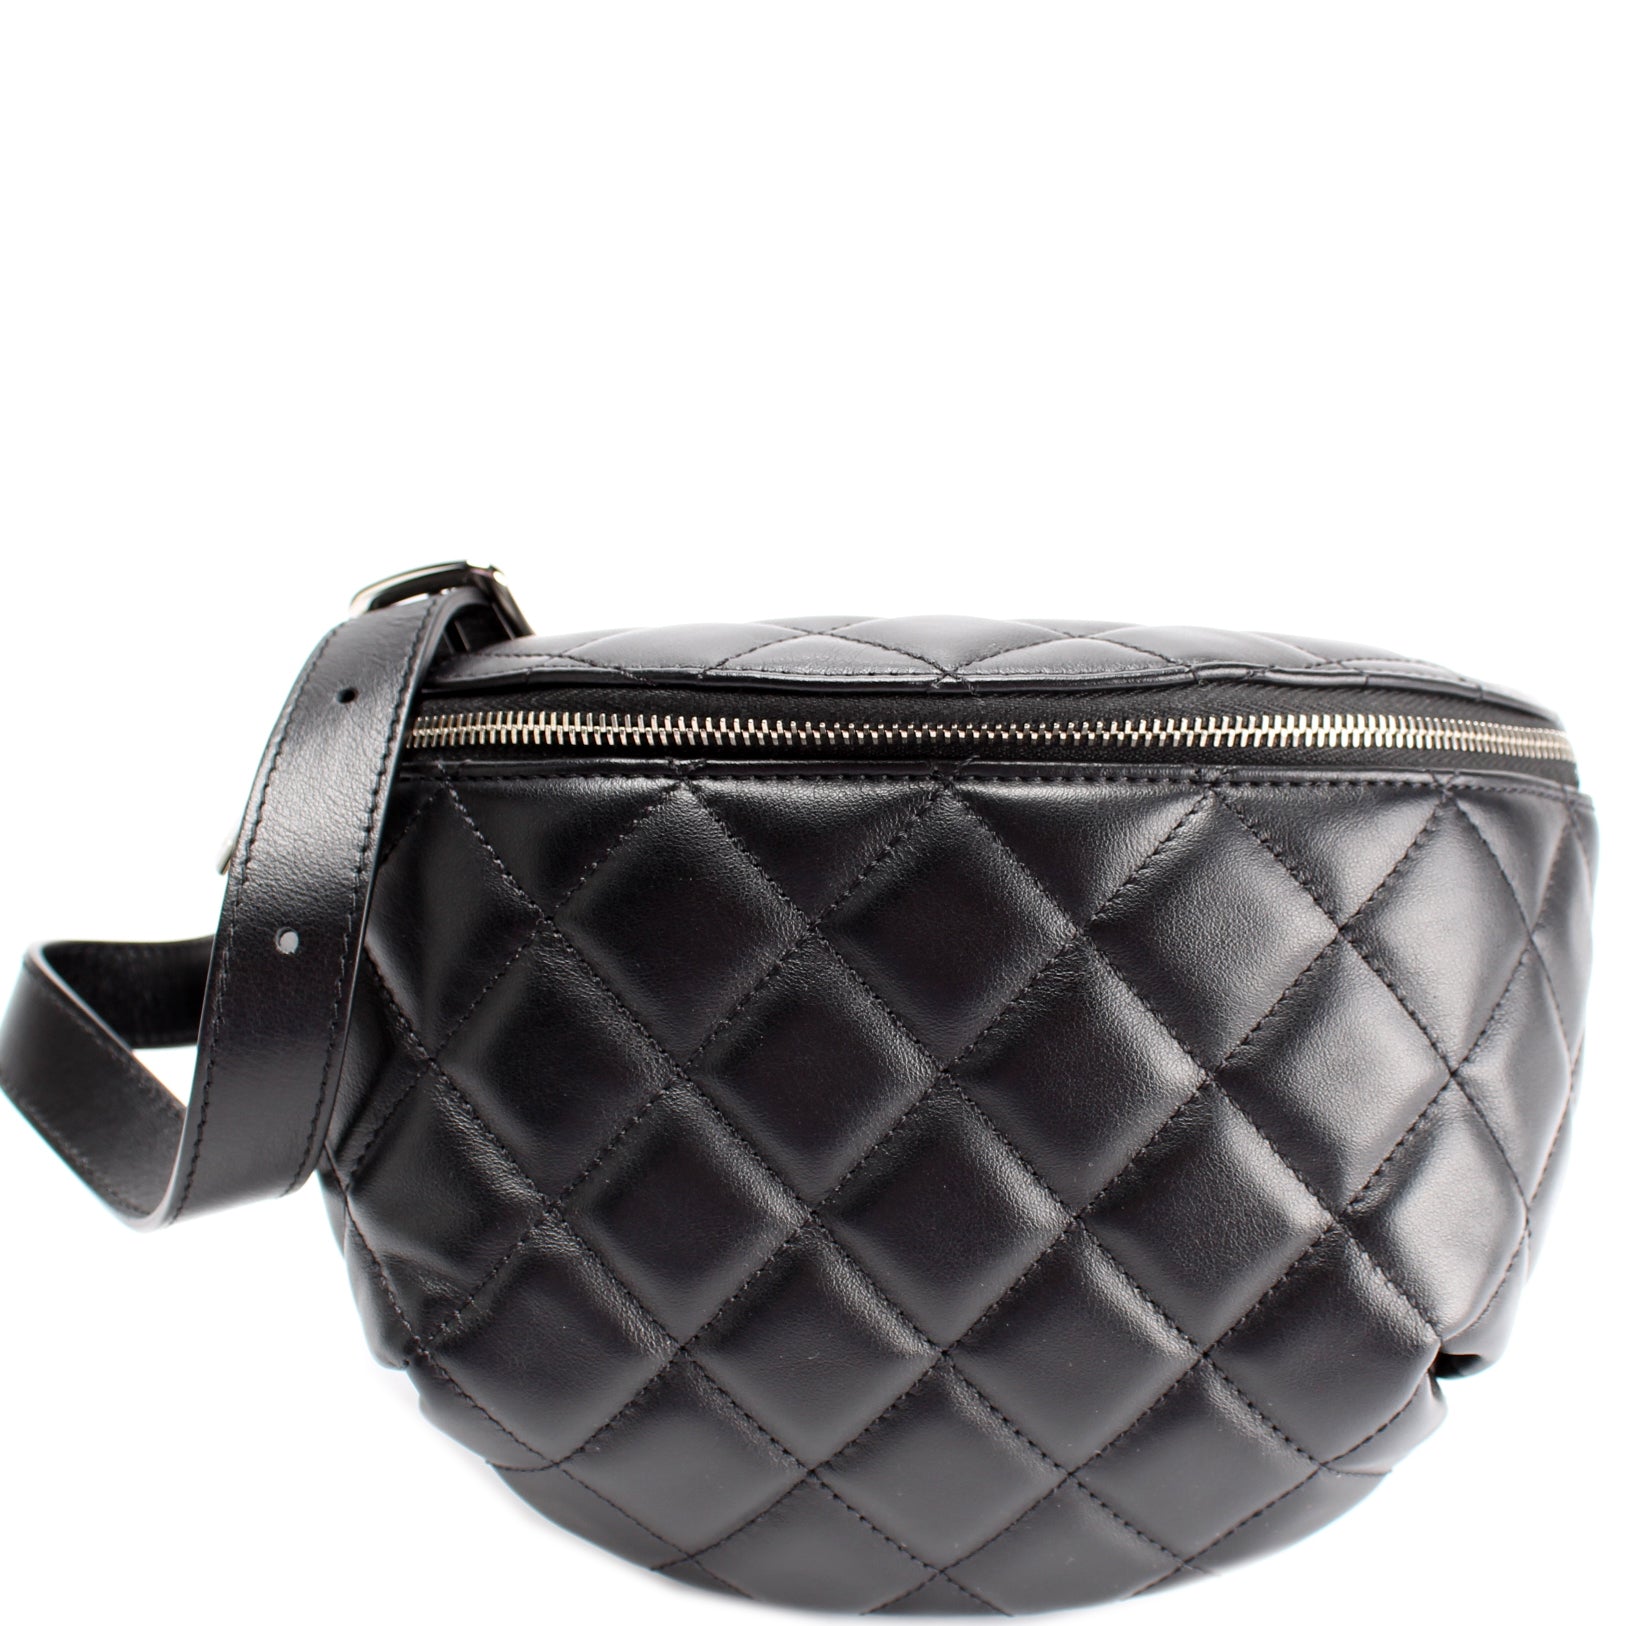 Auth CHANEL Bumbag Quilted Uniform Belt Bag Silver Hardware